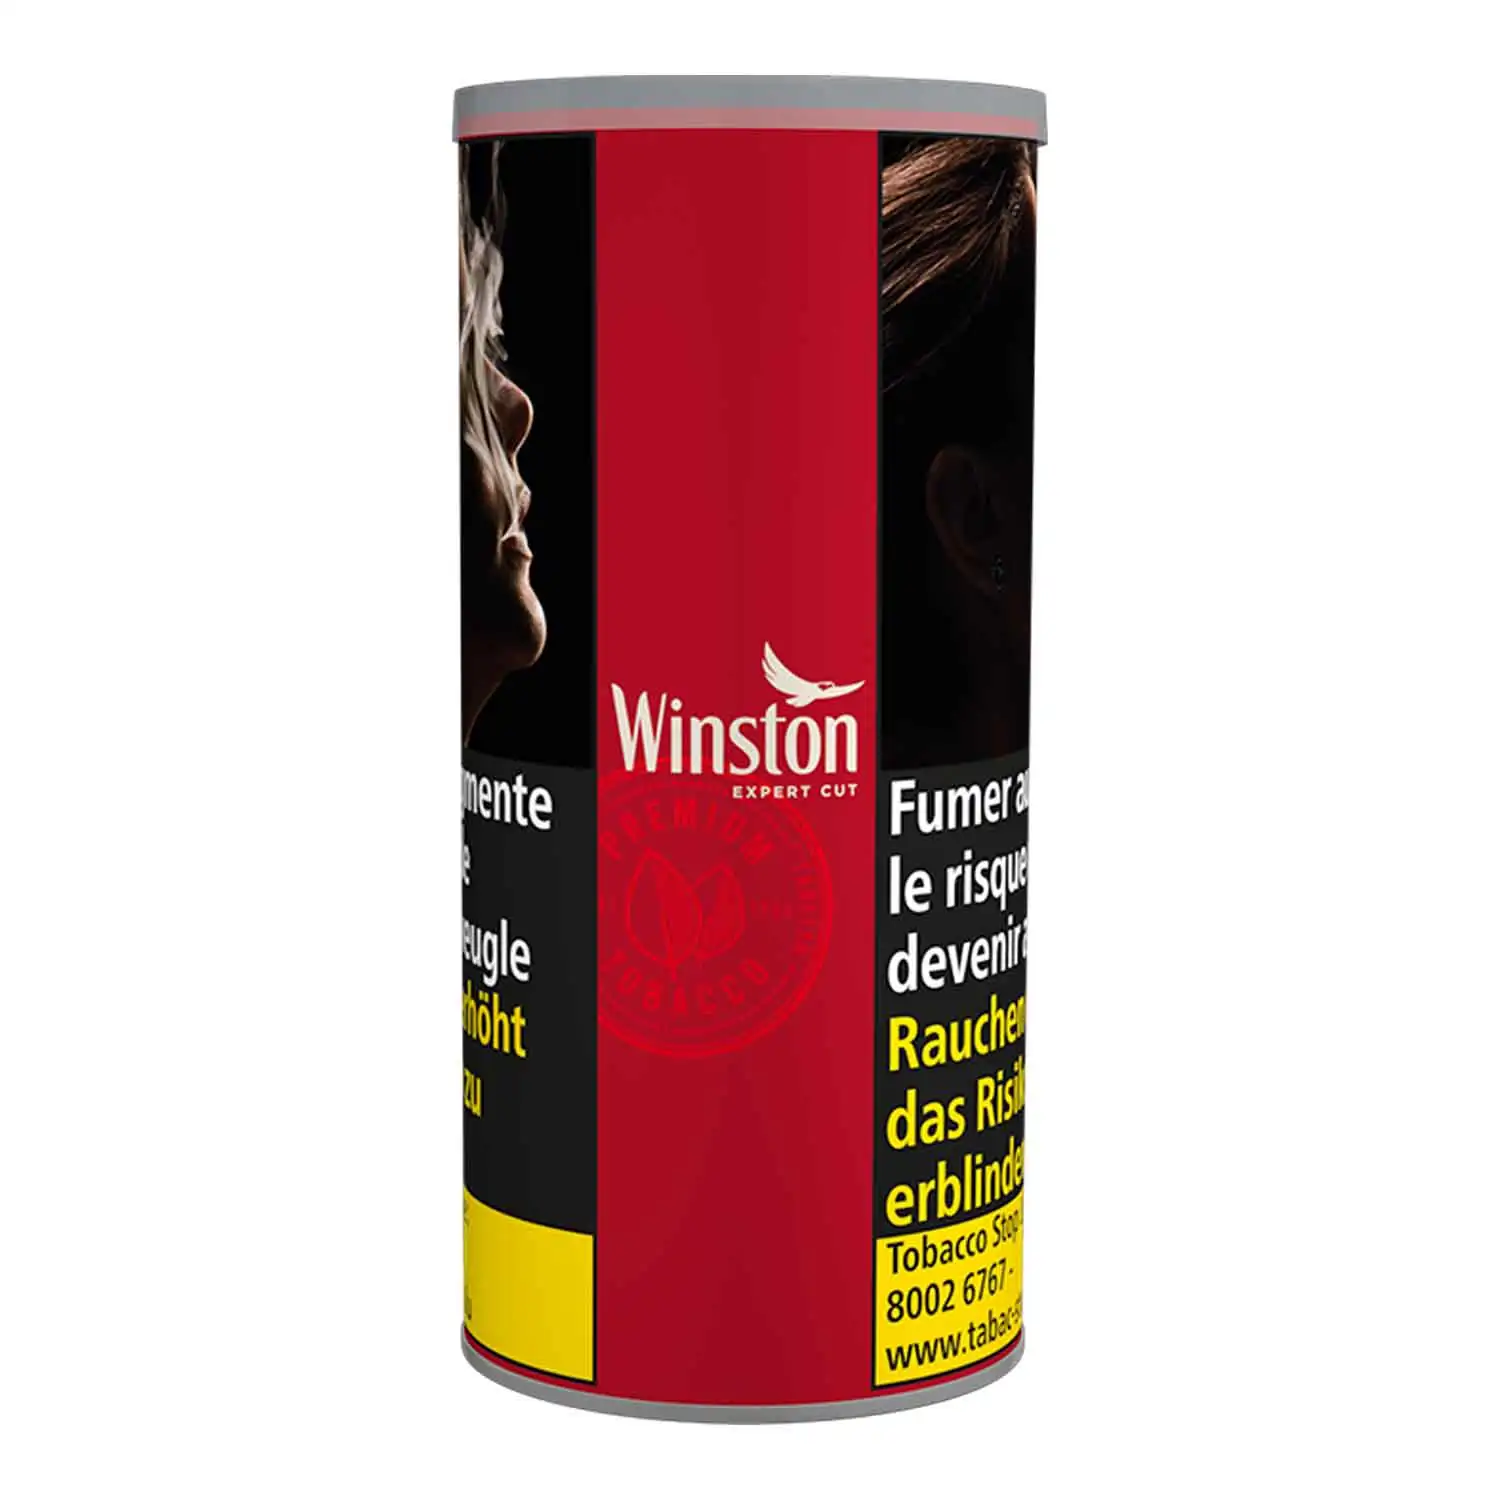 Winston expert rouge 300g - Buy at Real Tobacco